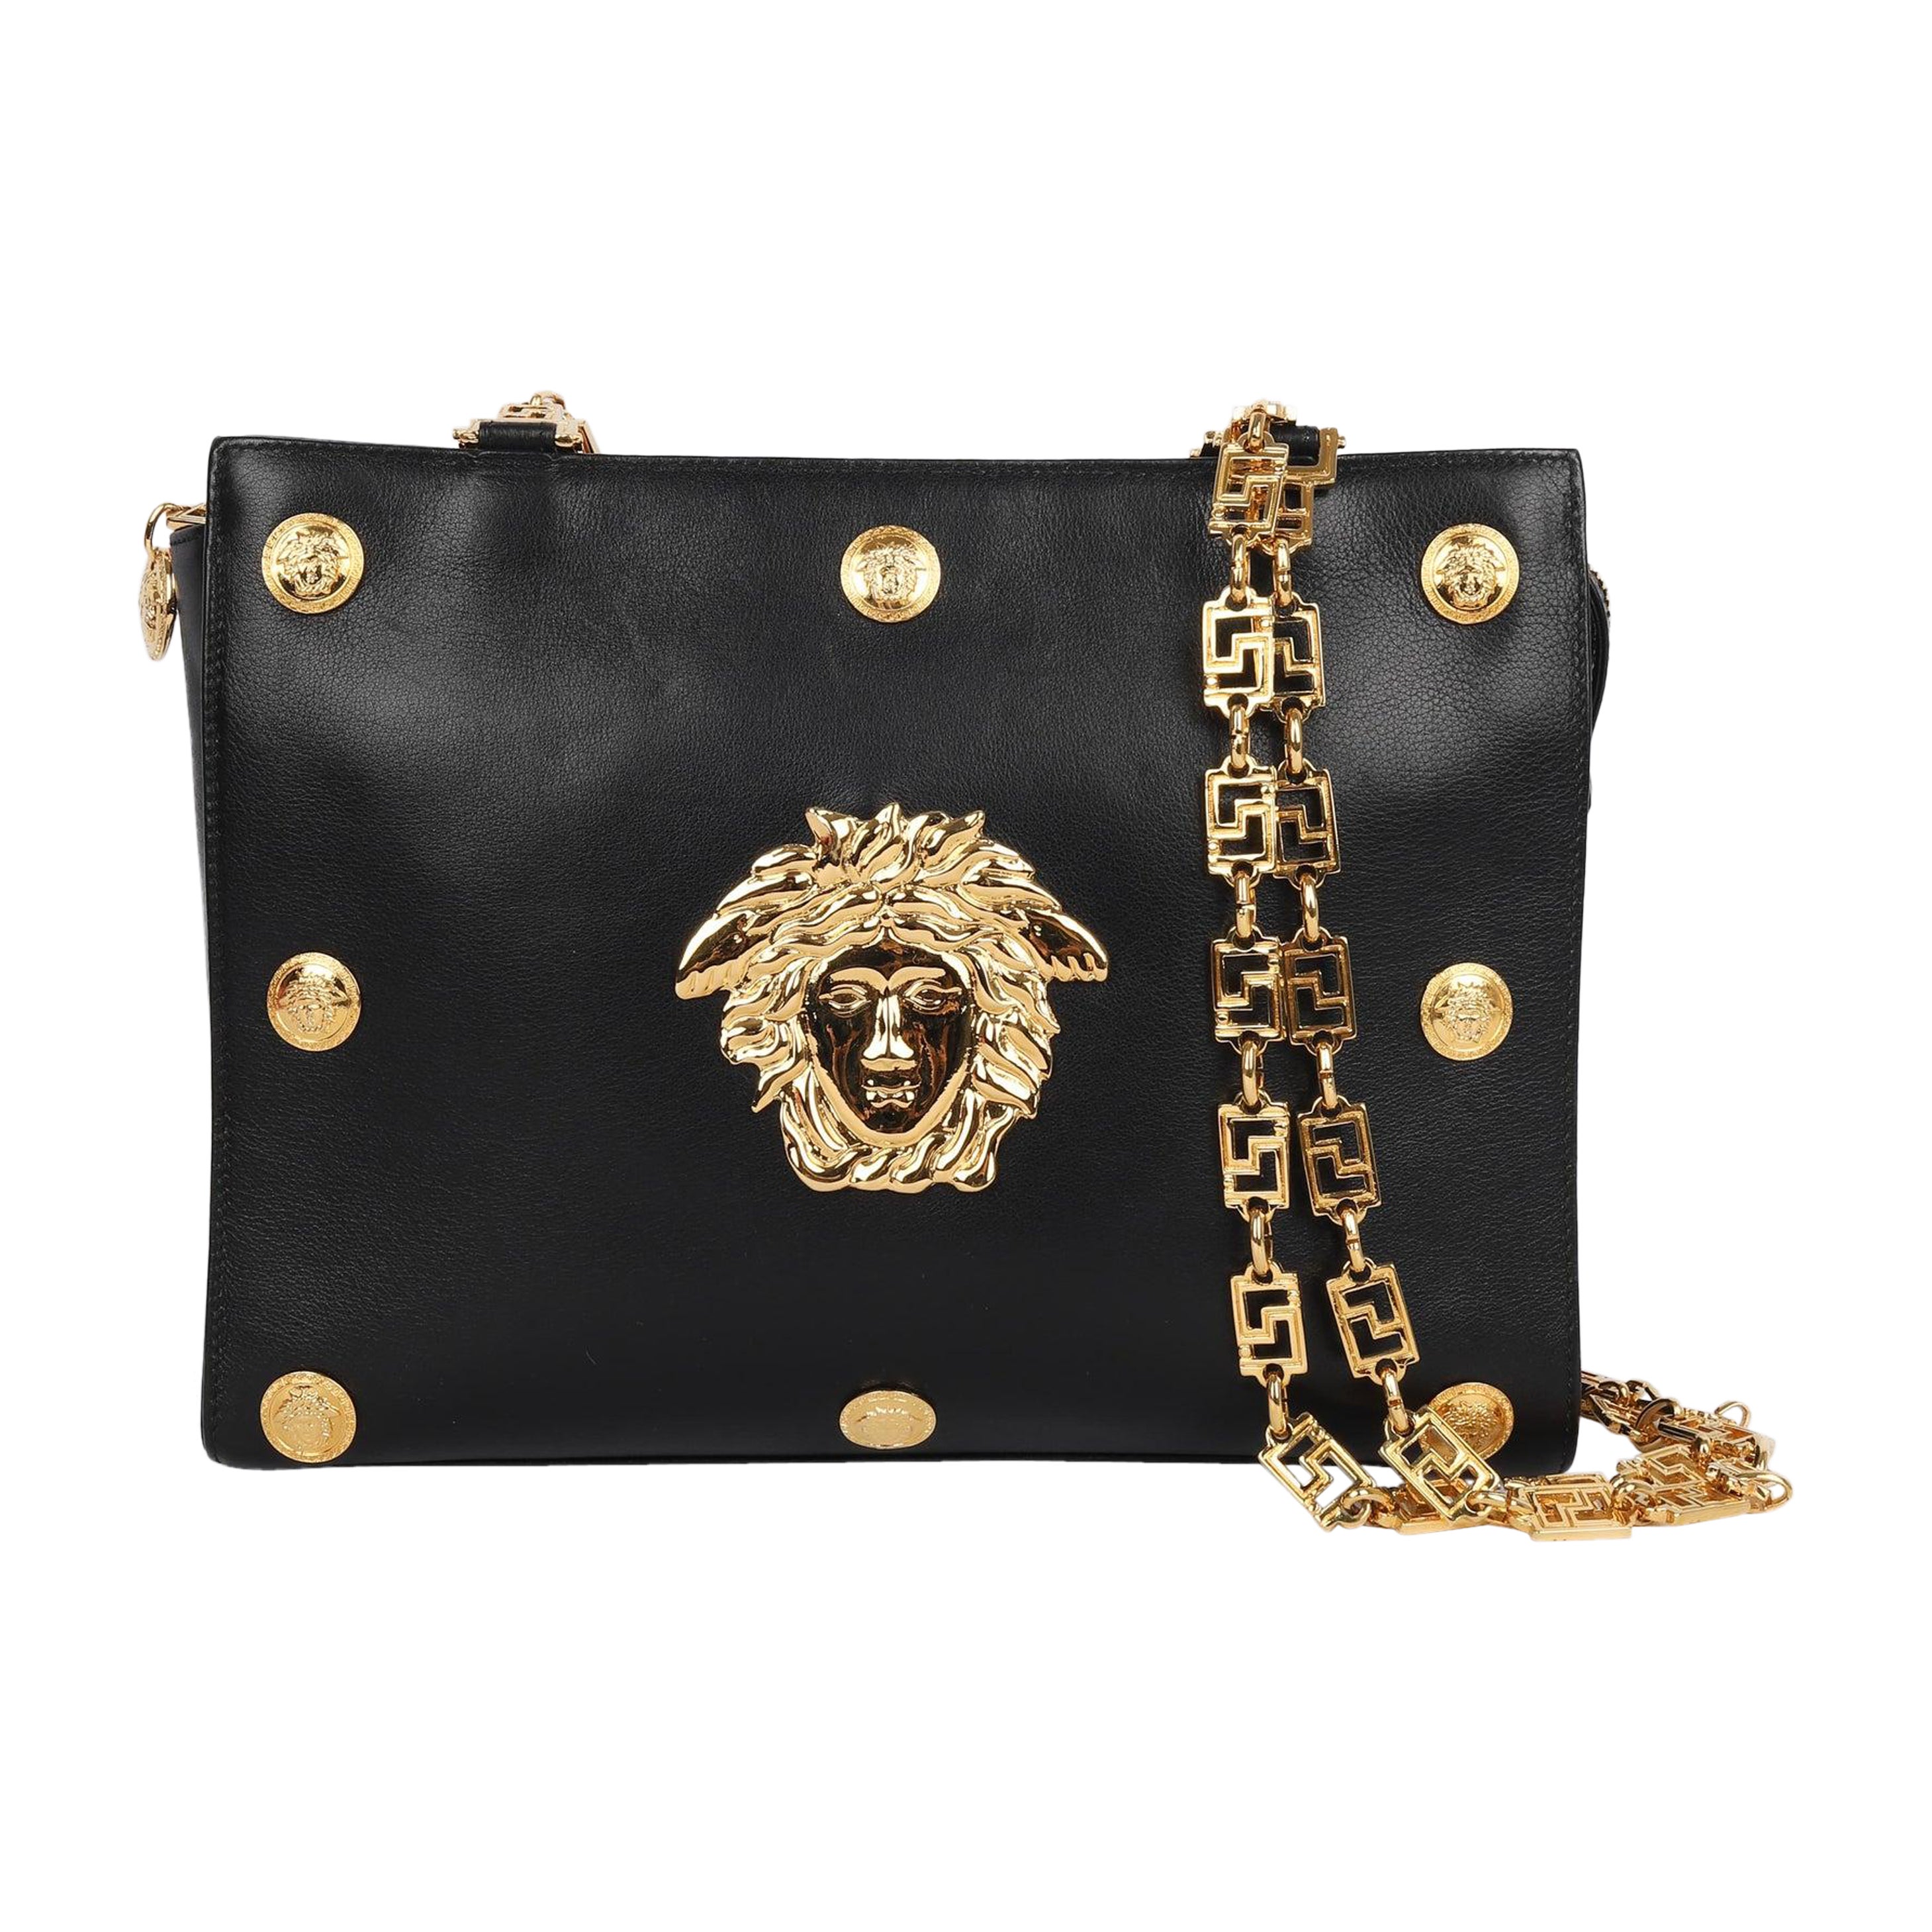 Gianni Versace Black Leather Bag with Golden Metal Elements For Sale